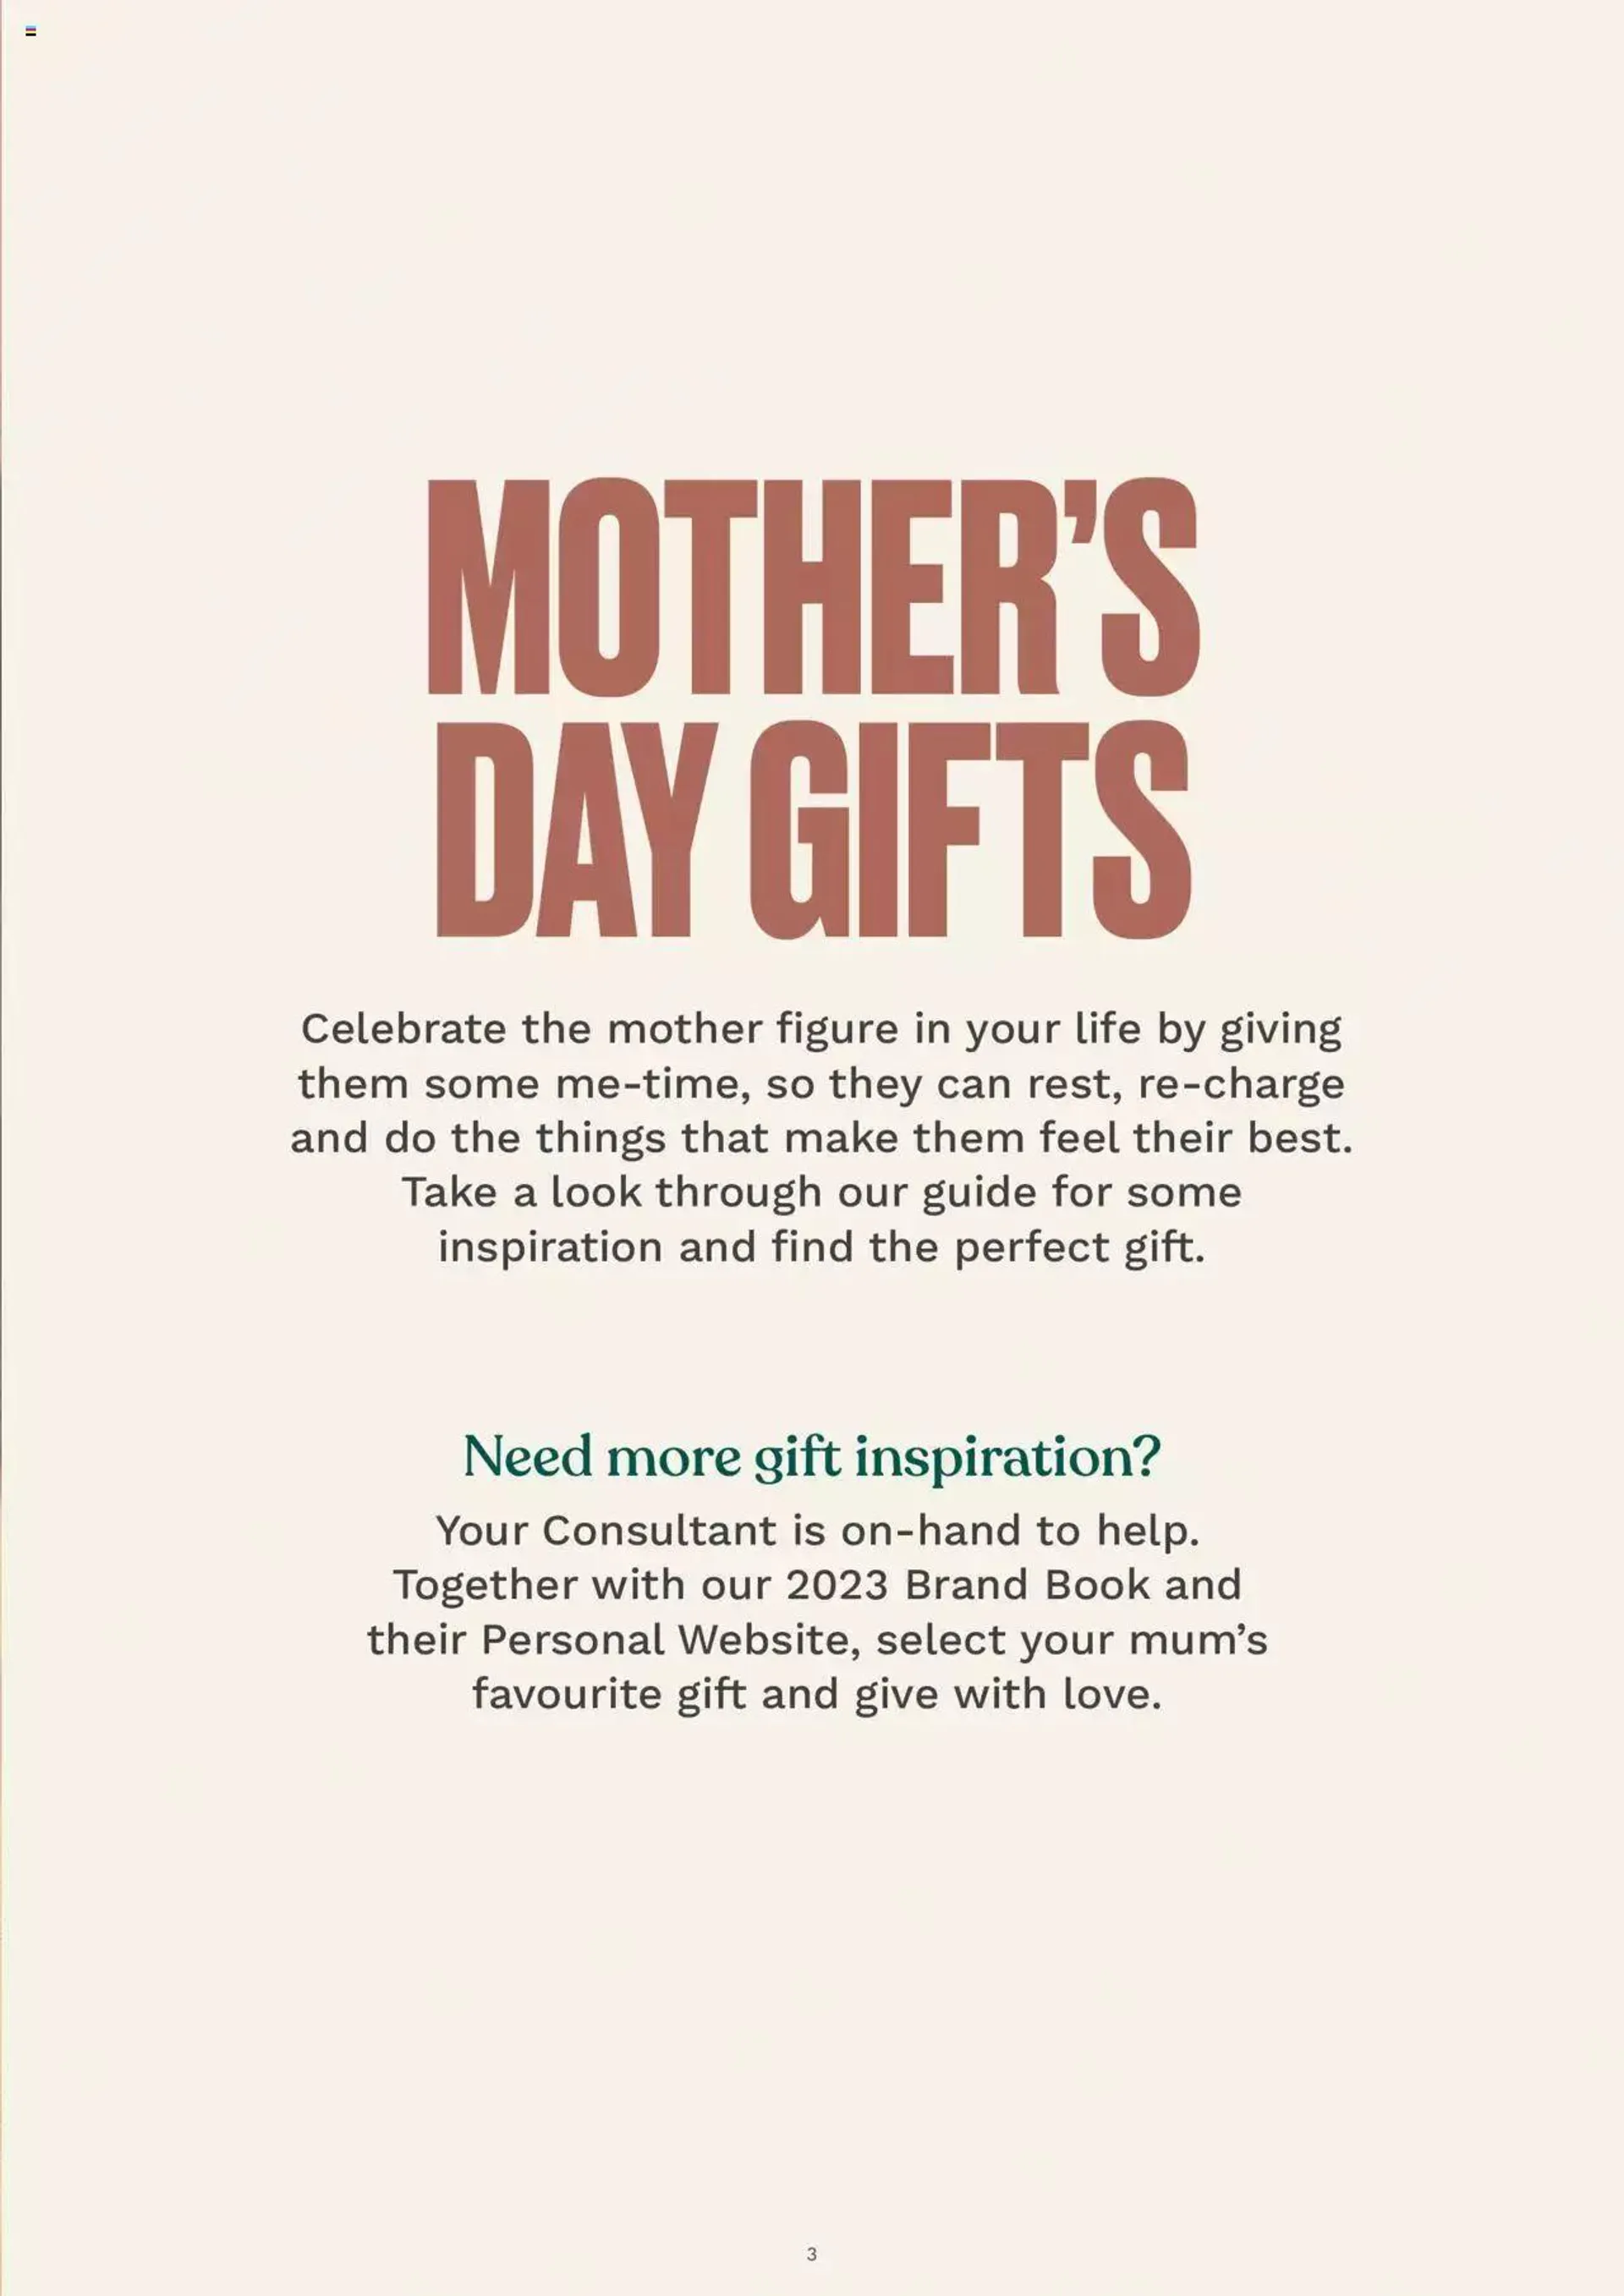 The Body Shop Mothers Day Gift Guide - 2